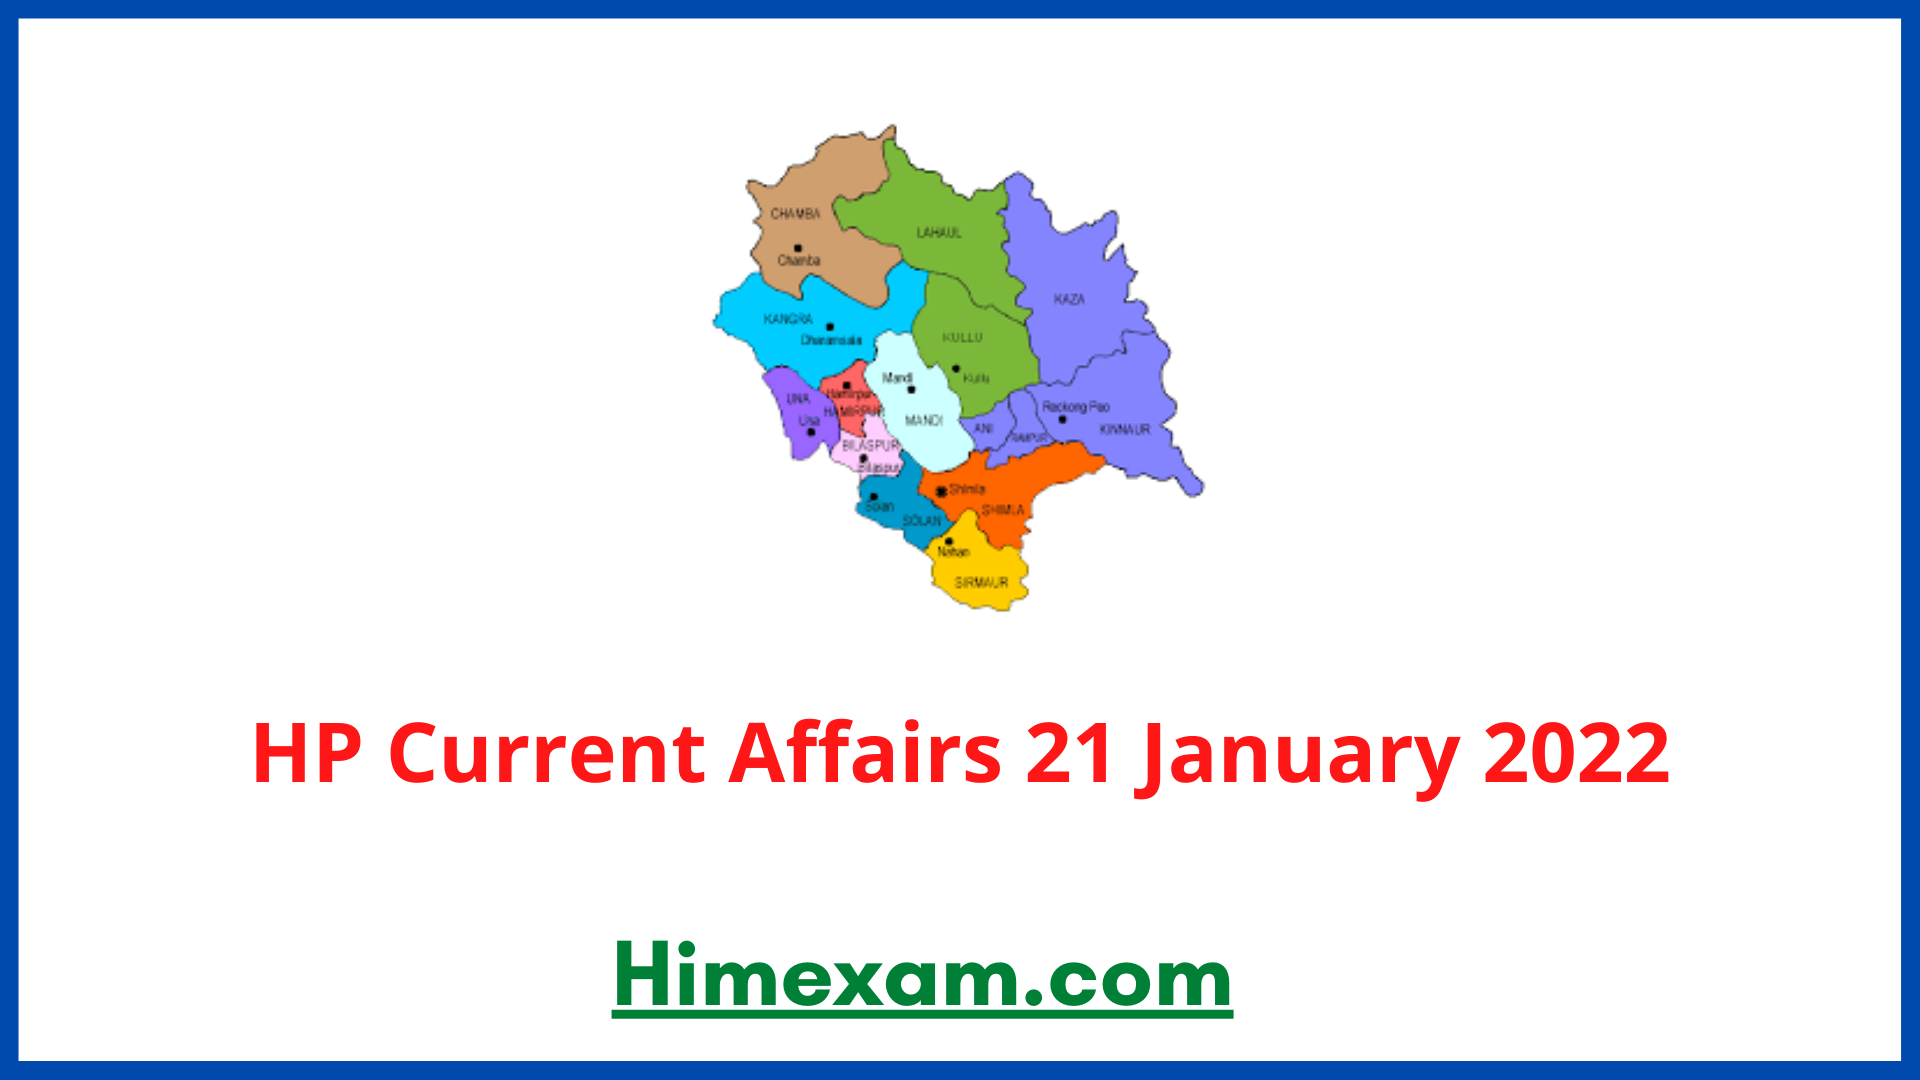 HP Current Affairs 21 January 2022